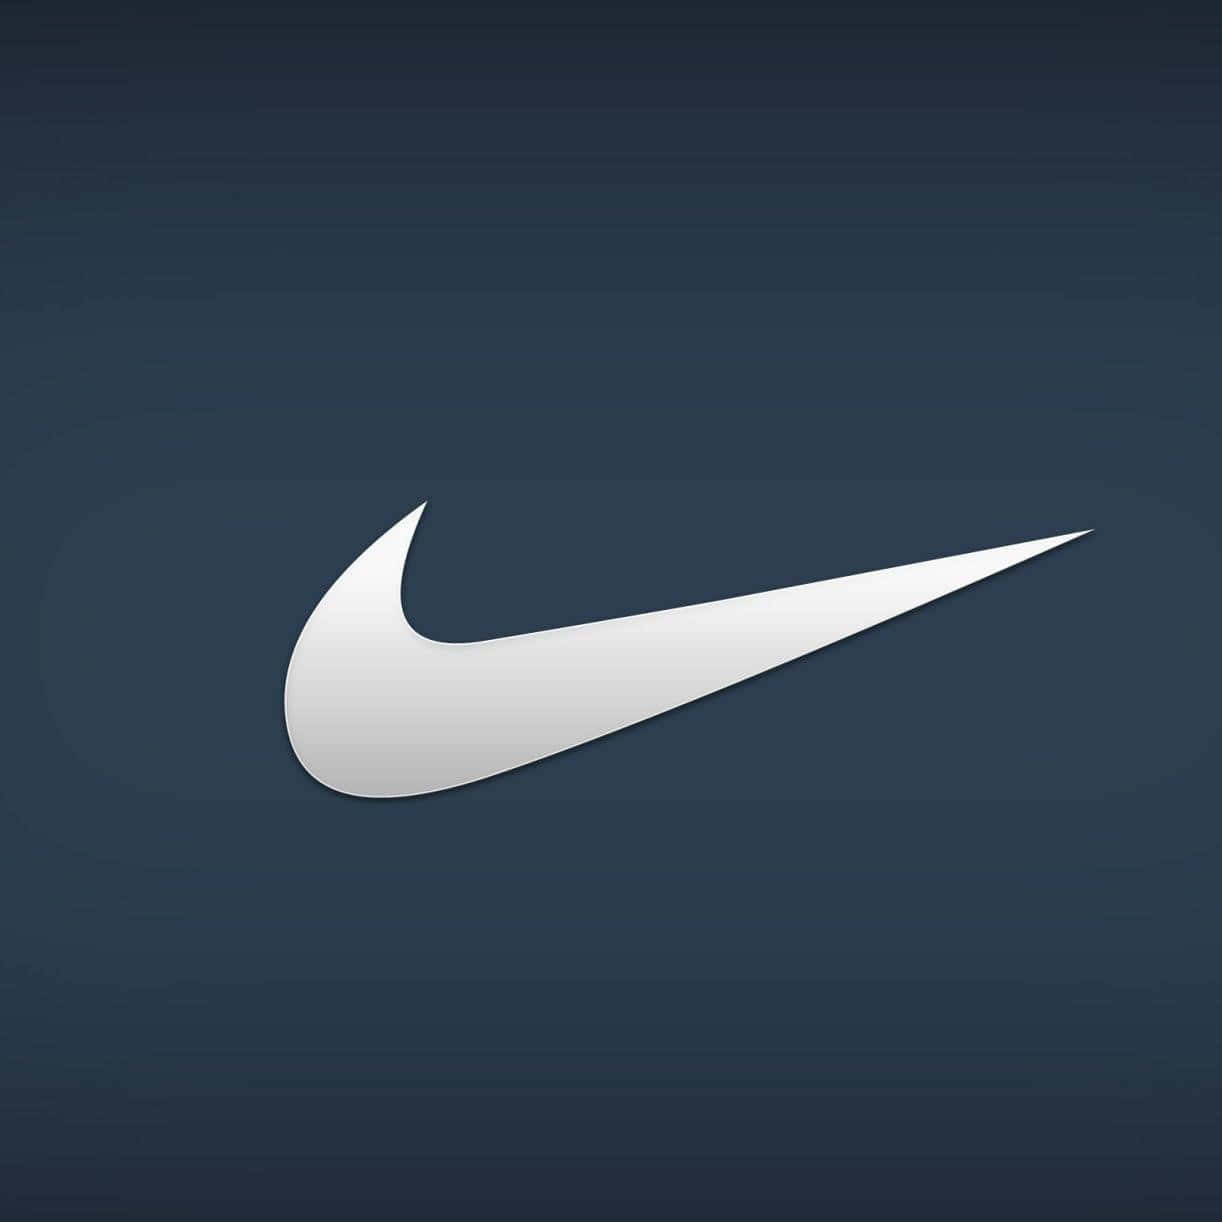 Logo of Nike featuring the signature swoosh in bright blue Wallpaper